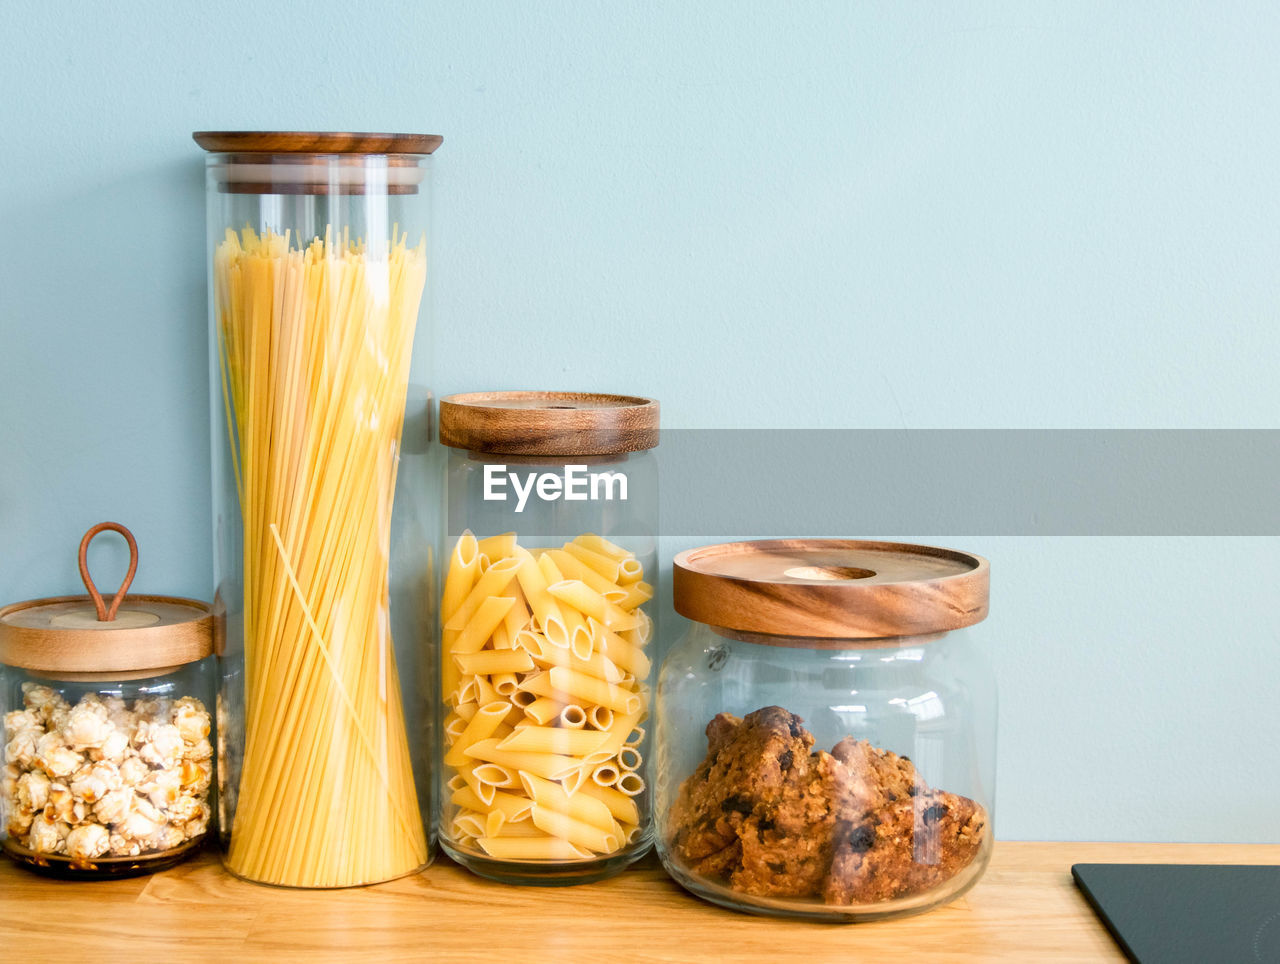 Noodle, cookie, pasta are keeping in the jar